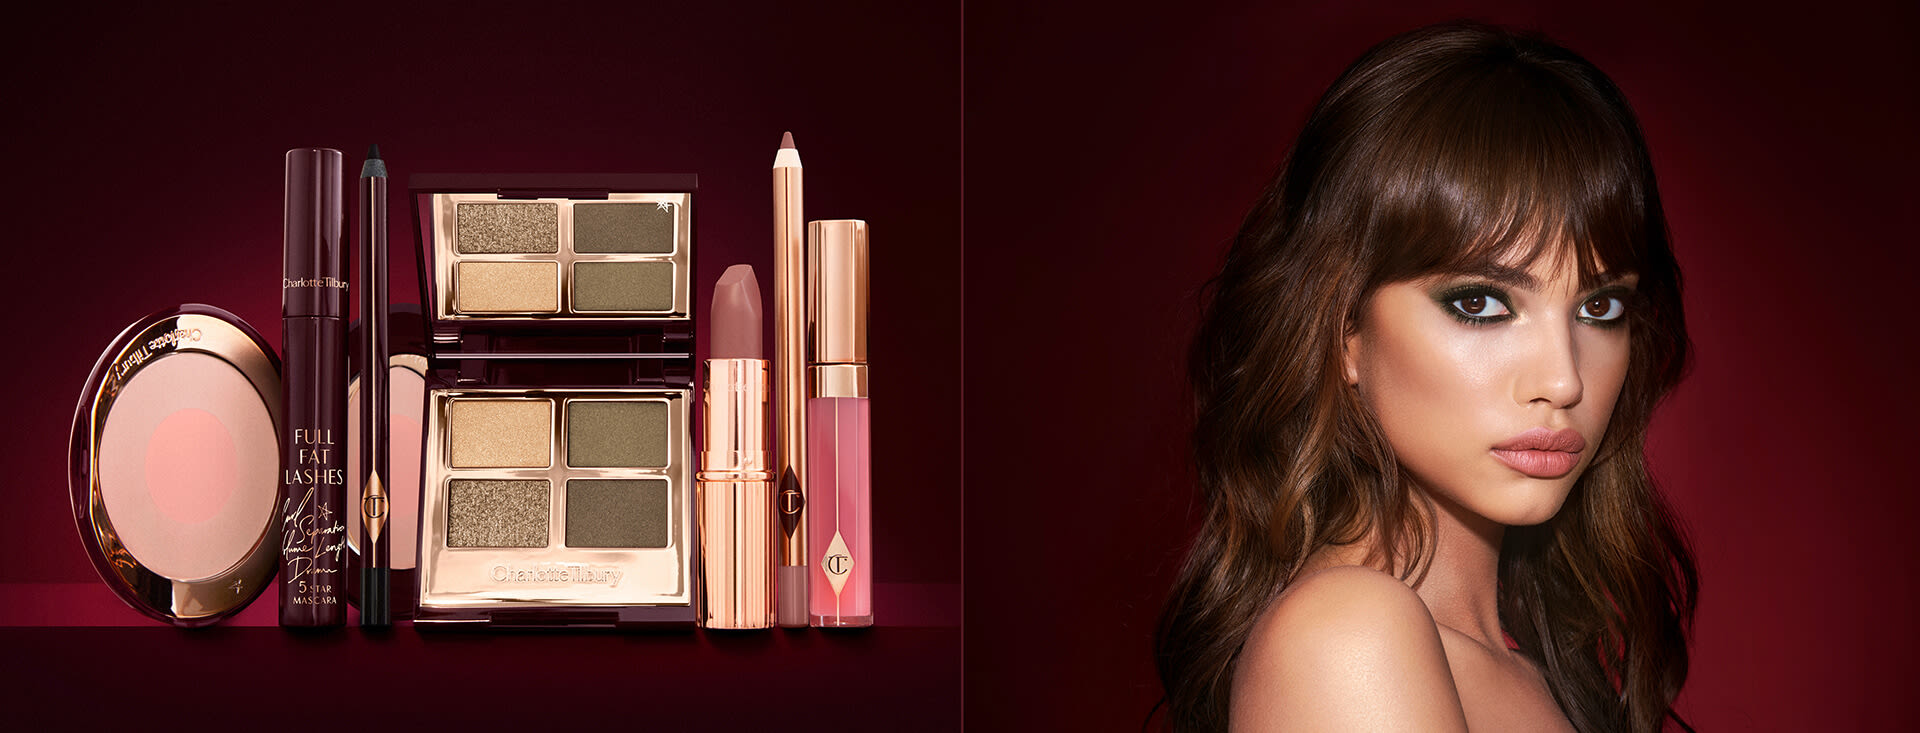 A medium-tone model with brown eyes wearing smokey green eye makeup with black eyeliner, soft brown blush, and nude brown lipstick, along with a quad eyeshadow palette in shades of green and gold, a brown eyeliner pencil, mascara, an open two-tone blush in nude pink, a warm pink lip liner pencil, a warm rose lipstick, and a bright pink lip gloss. 